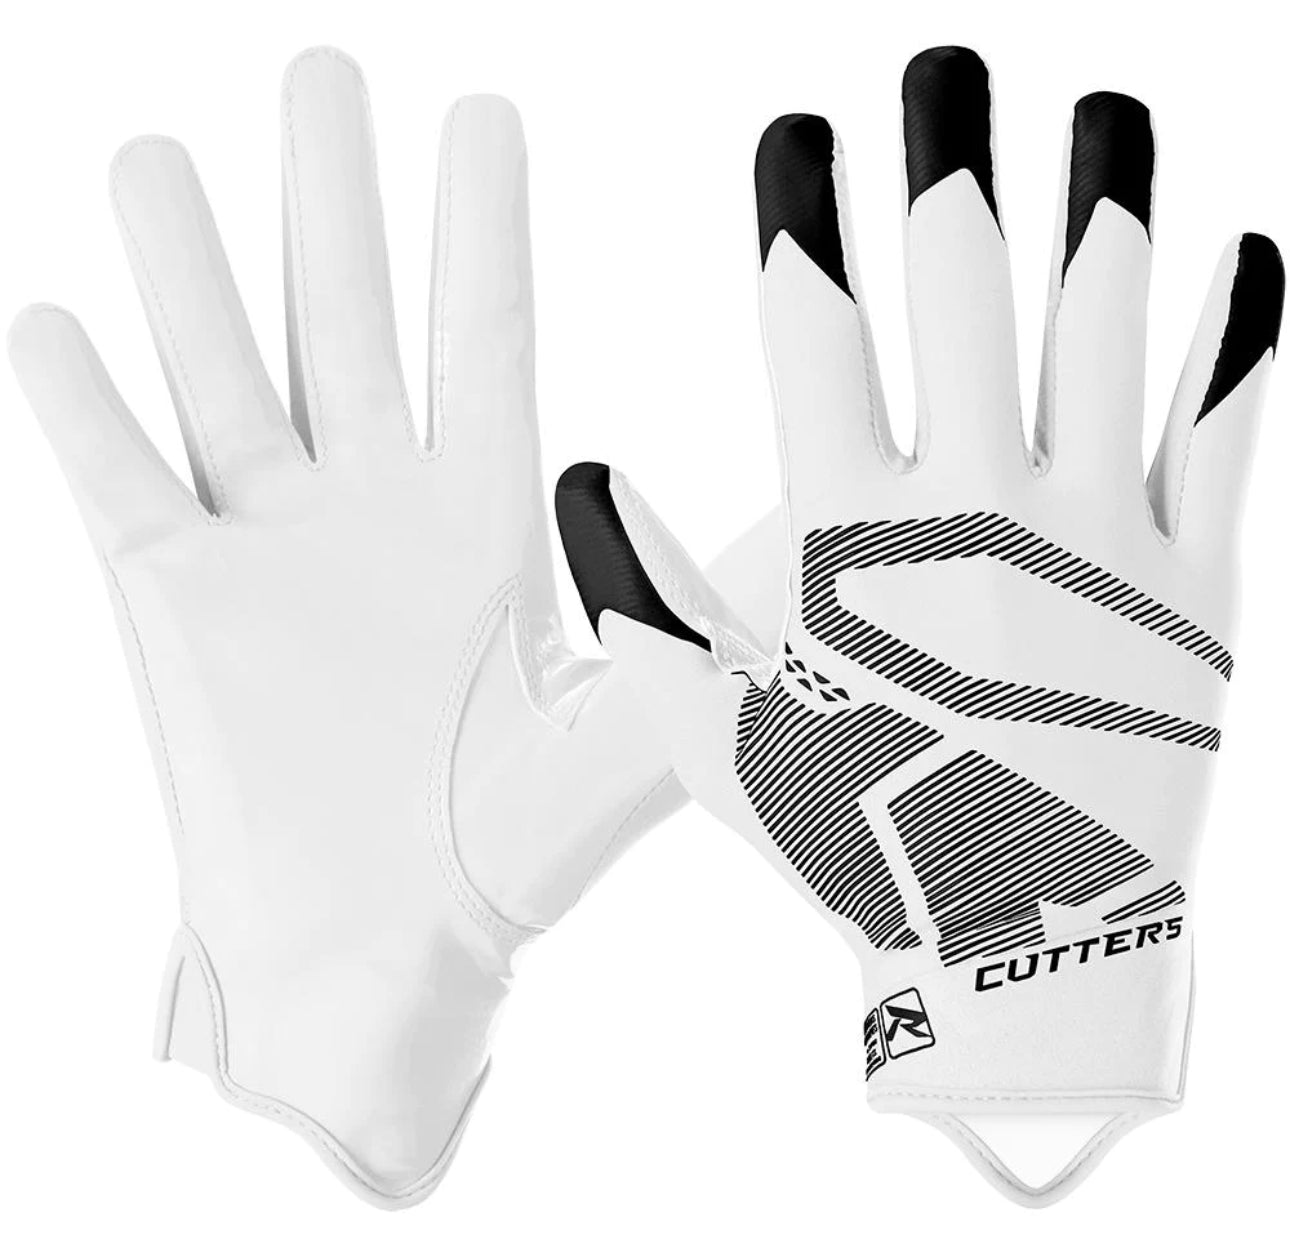 REV 4.0 RECEIVER GLOVES SMALL ONLY